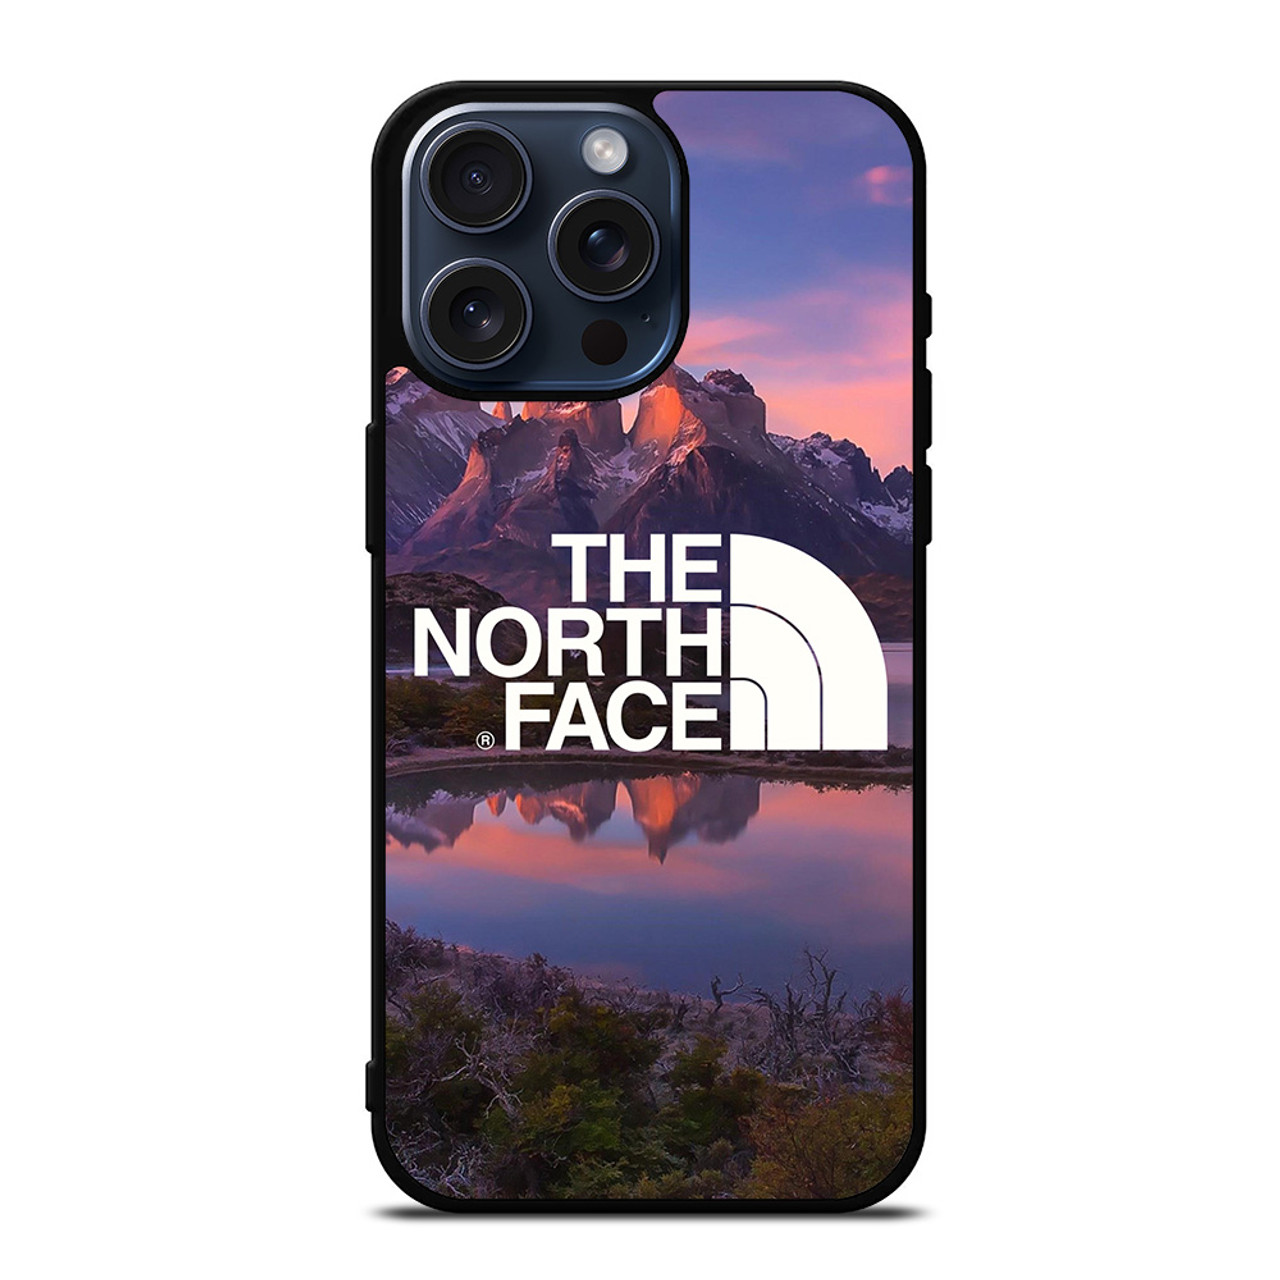 THE NORTH FACE PATAGONIA MOUNTAINS iPhone 15 Pro Max Case Cover